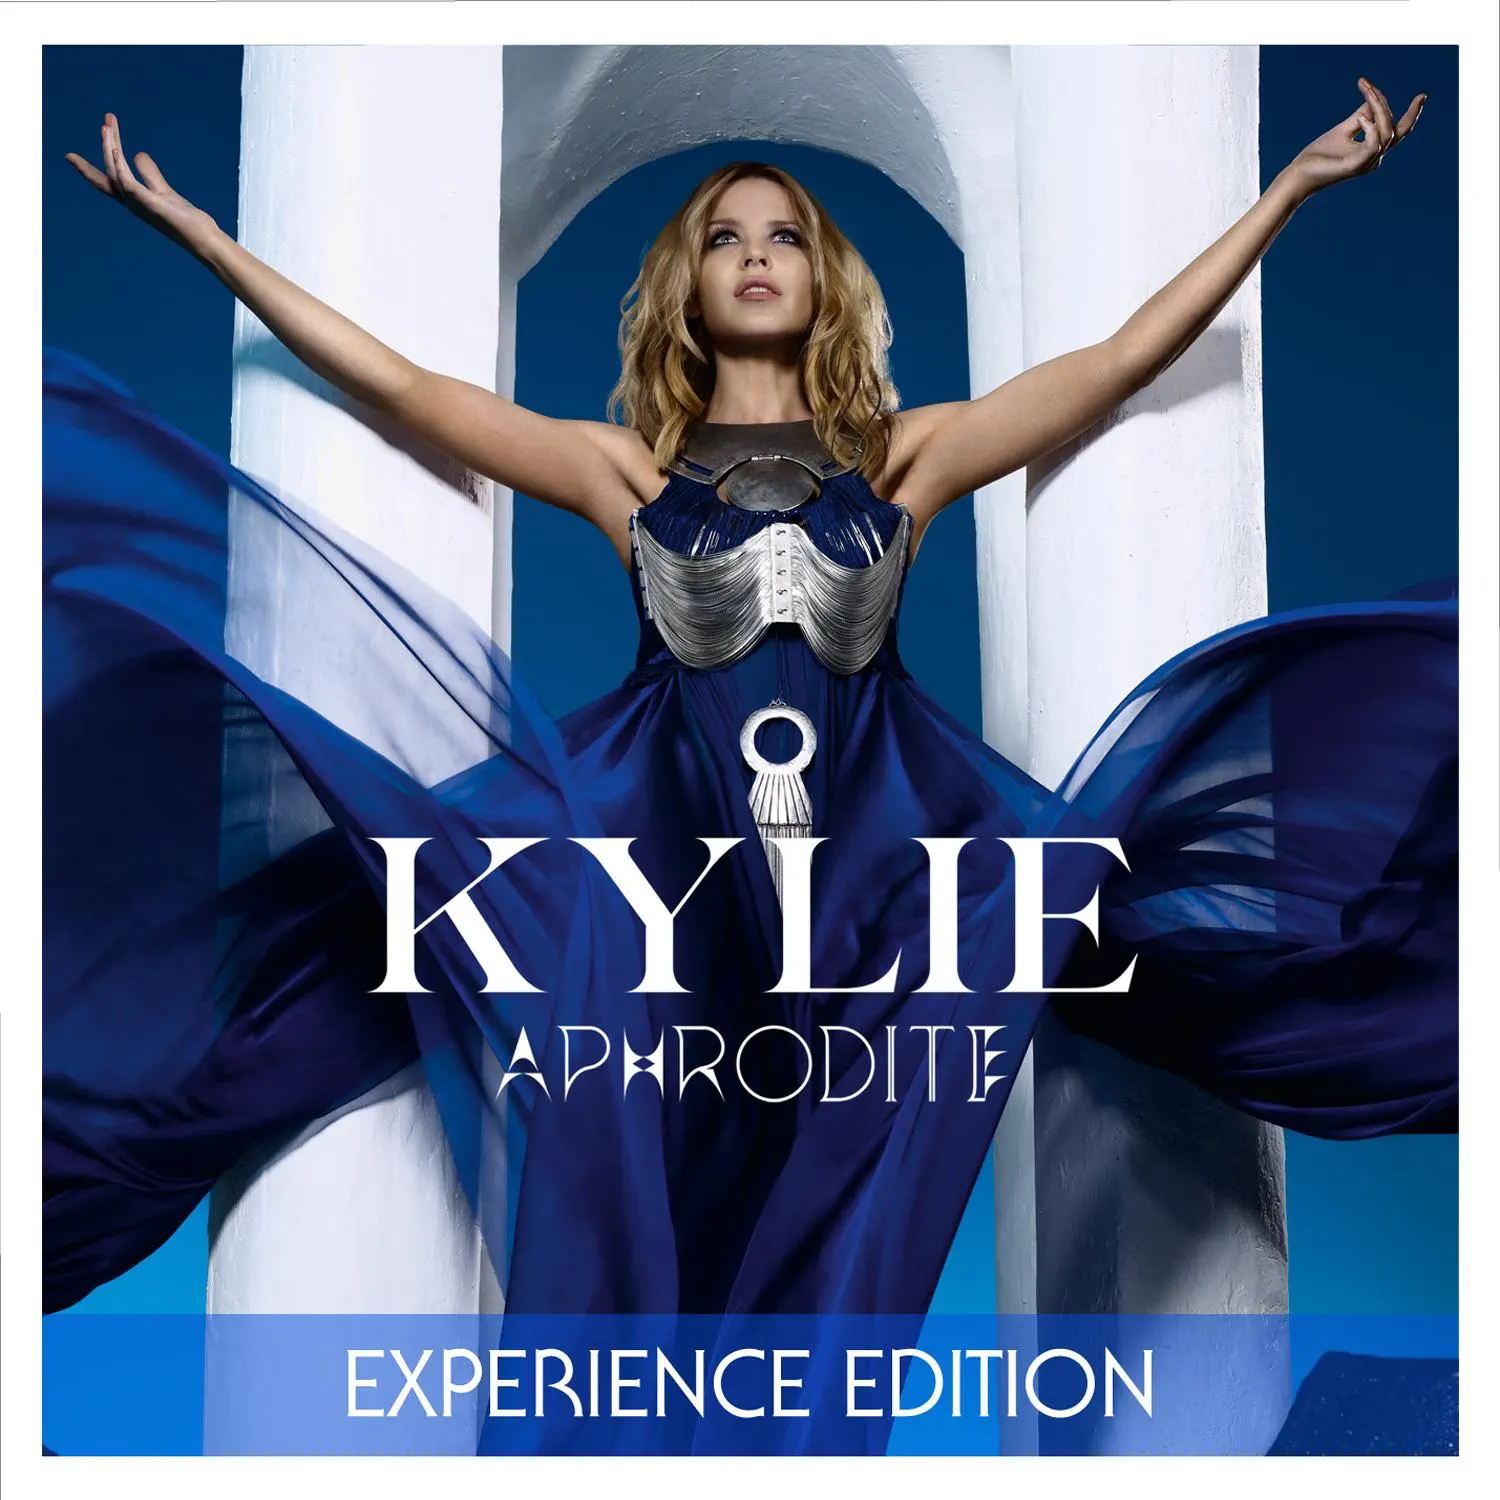 Kylie Minogue - Aphrodite (Deluxe Experience Edition) (2010) [iTunes Plus AAC M4A]-新房子